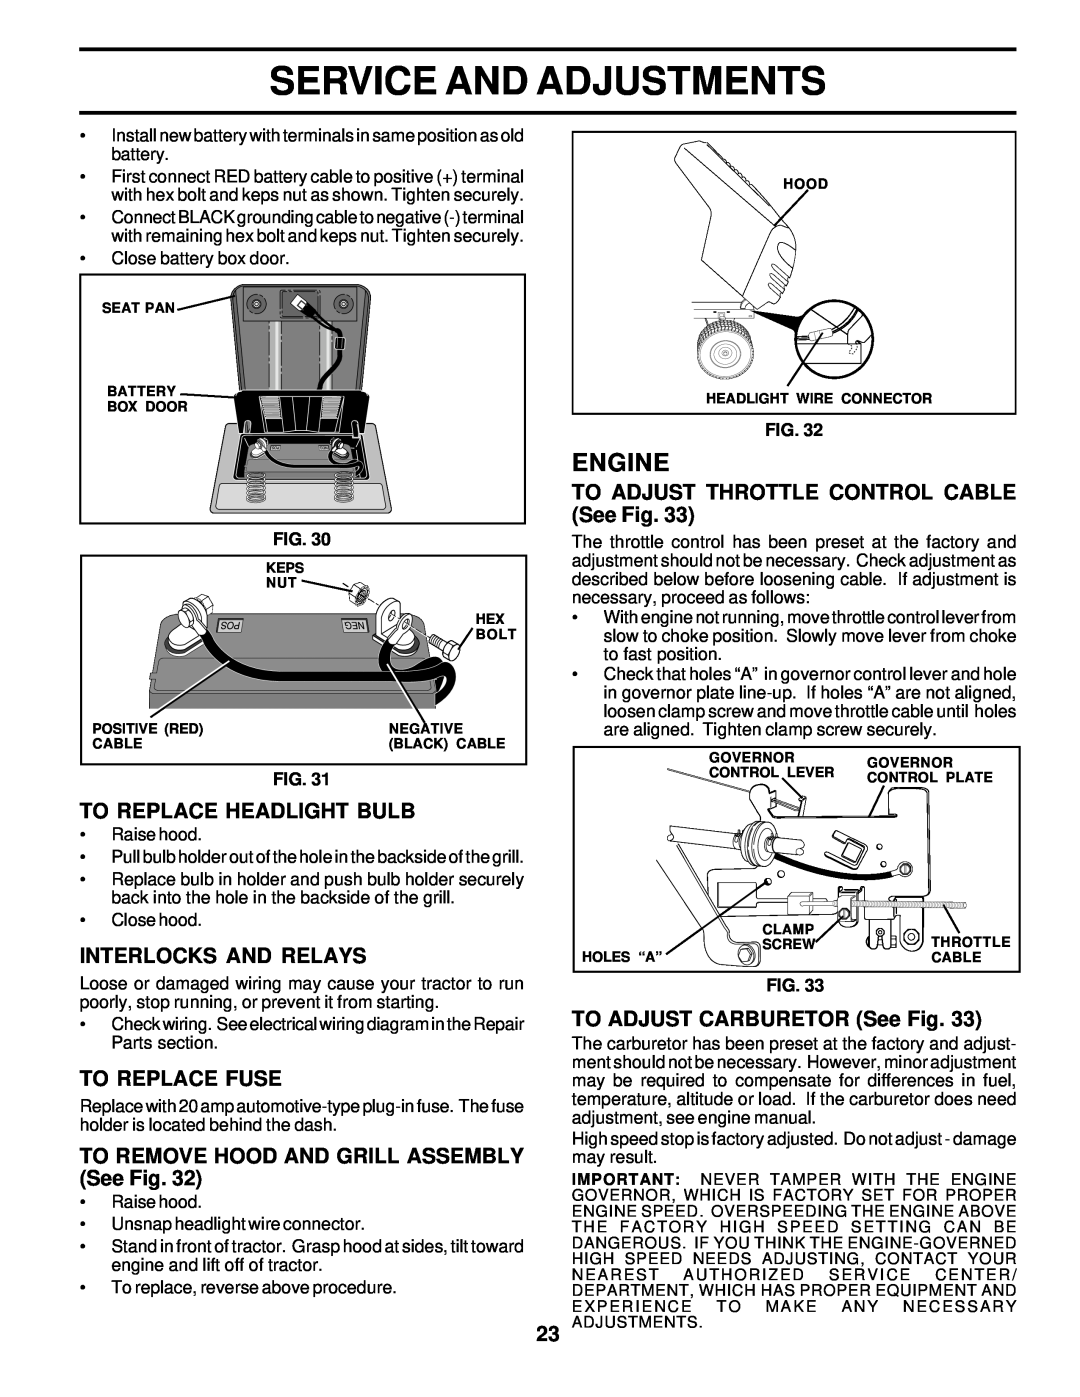 Poulan 177029 To Replace Headlight Bulb, Interlocks And Relays, To Replace Fuse, TO REMOVE HOOD AND GRILL ASSEMBLY See Fig 